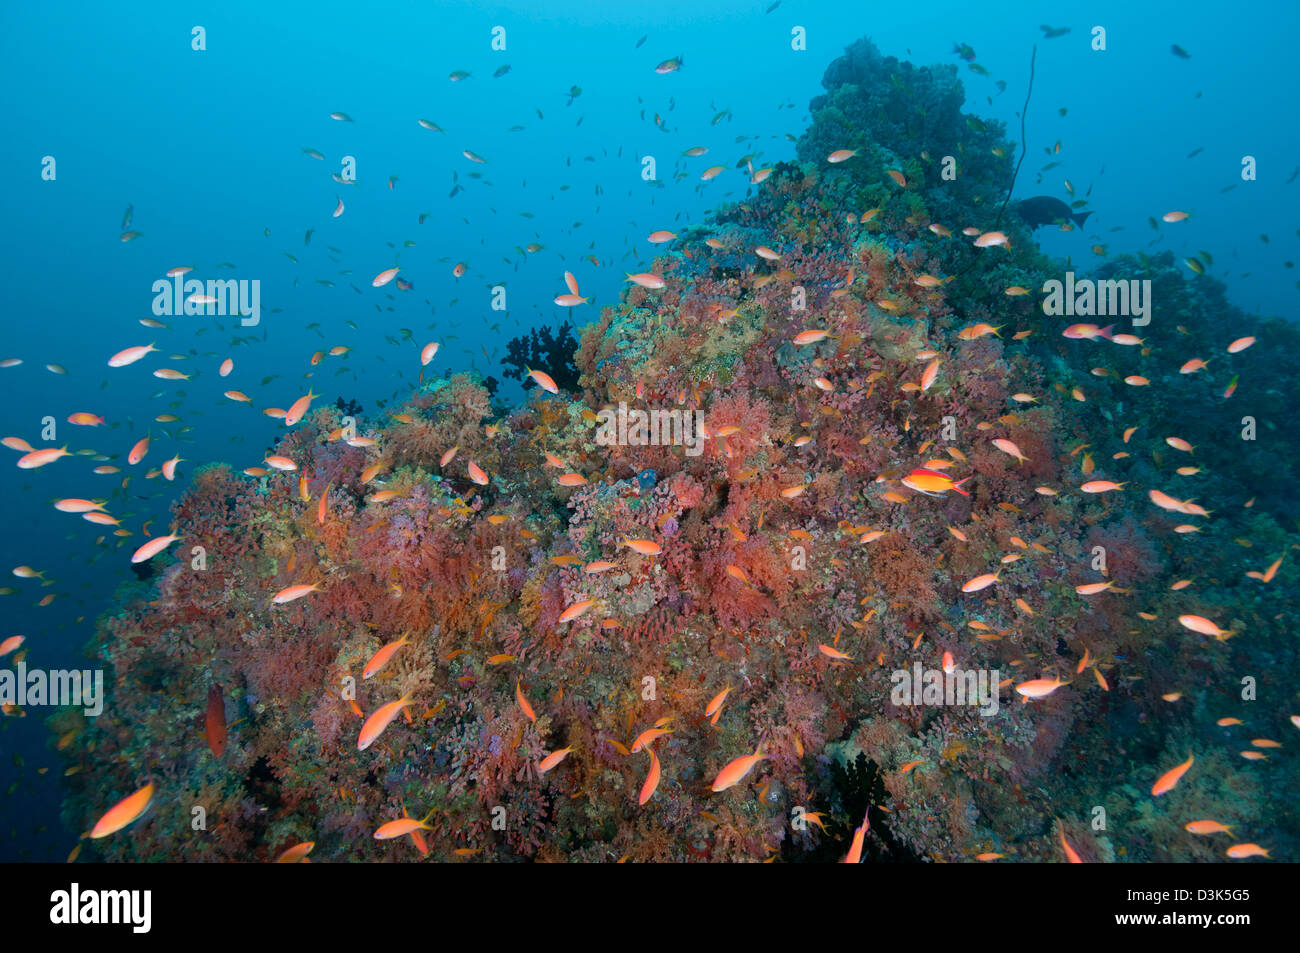 Colourful reef with pink red and green hard and soft coral and orange anthias fish, Ari and Male Atoll, Maldives. Stock Photo